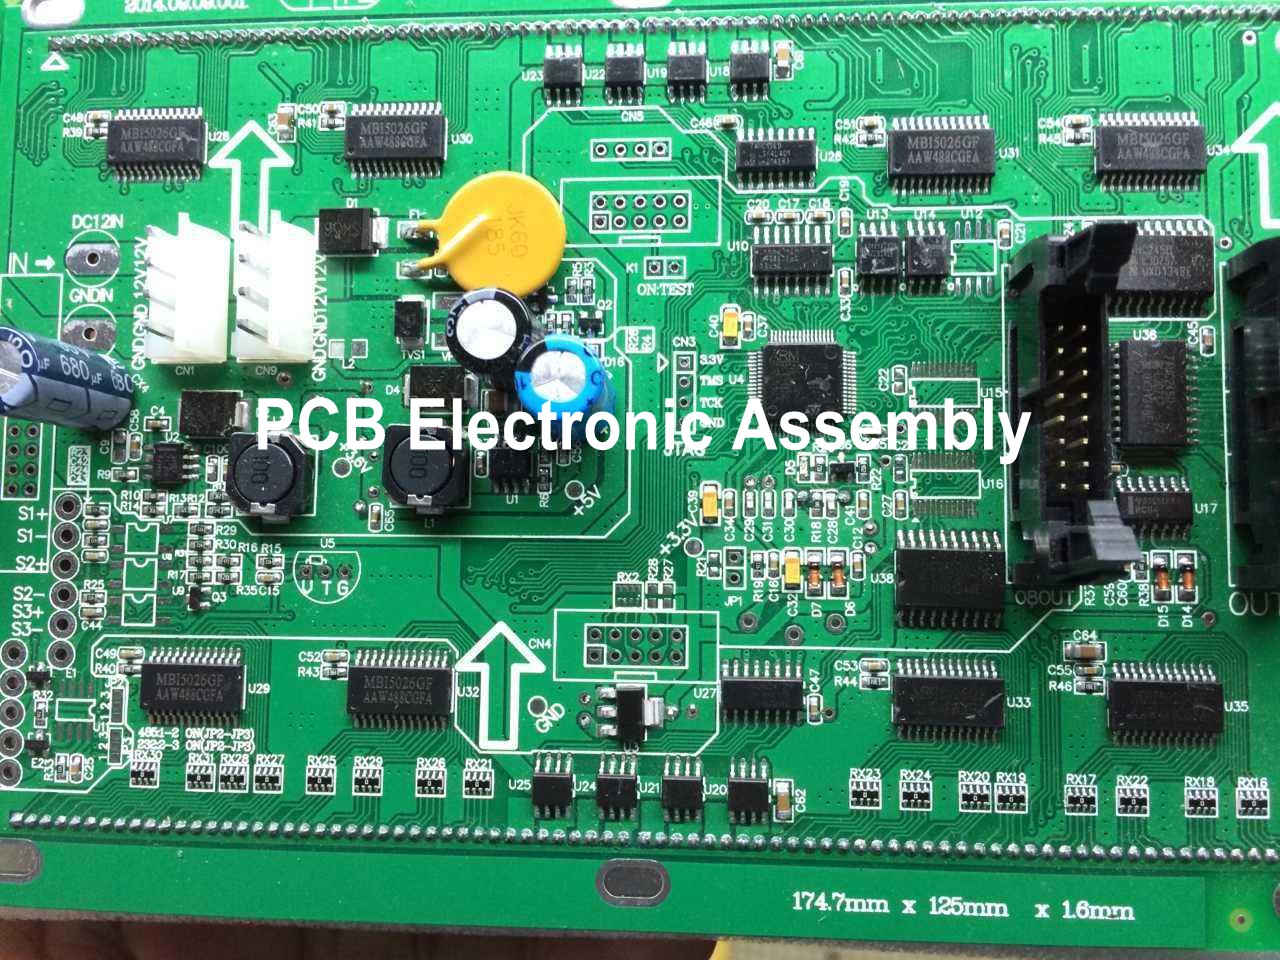 PCB Electronic Assembly